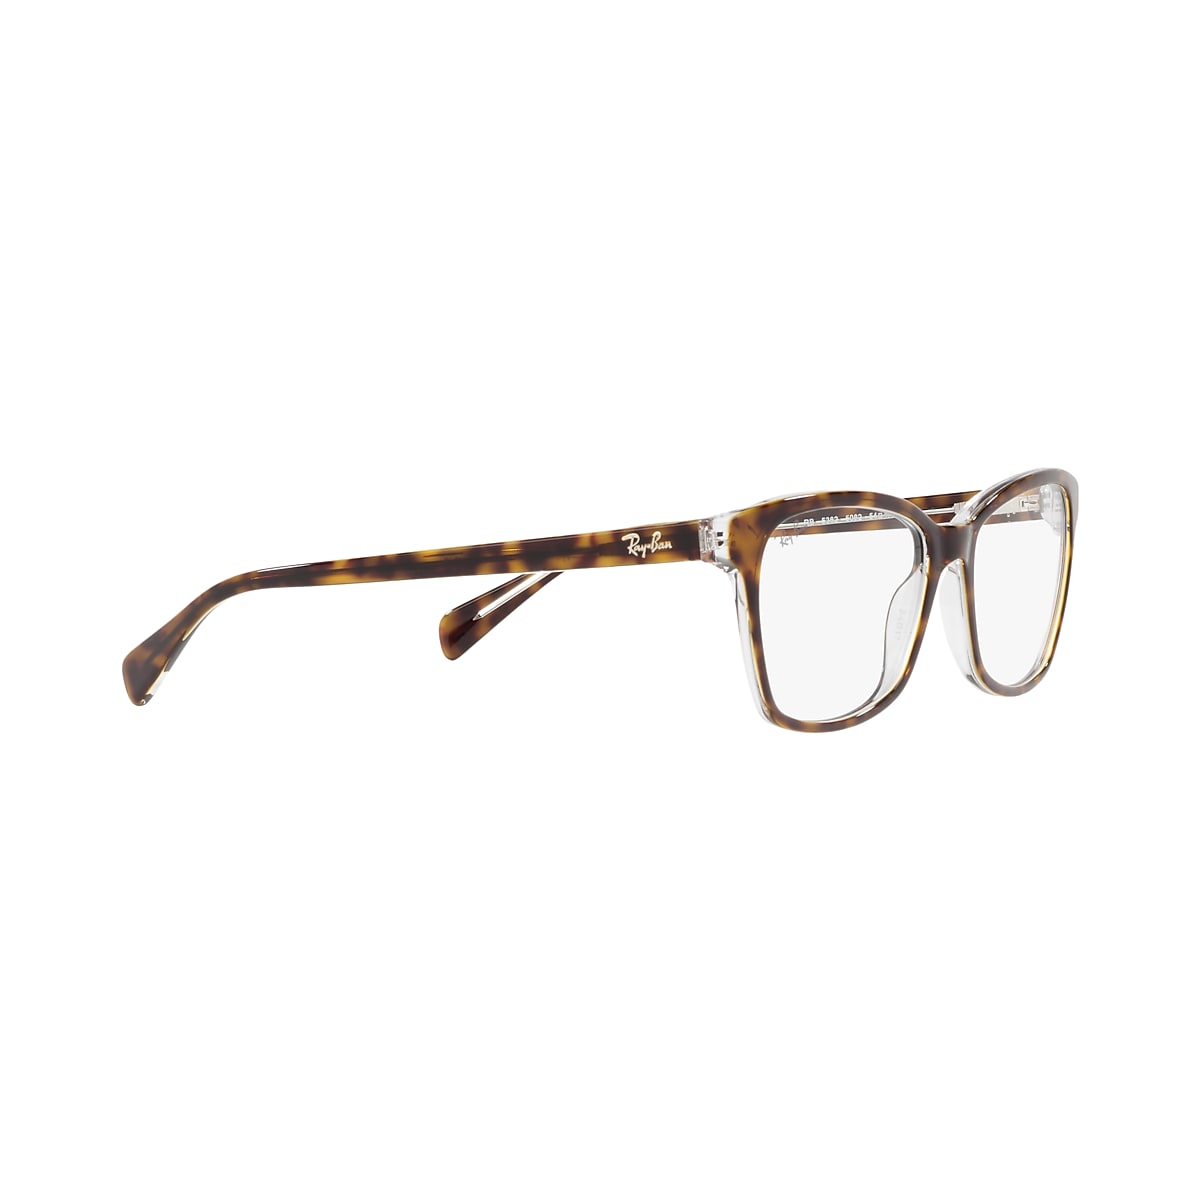 Ray-Ban 0RX5362 Glasses in Tortoise | Target Optical